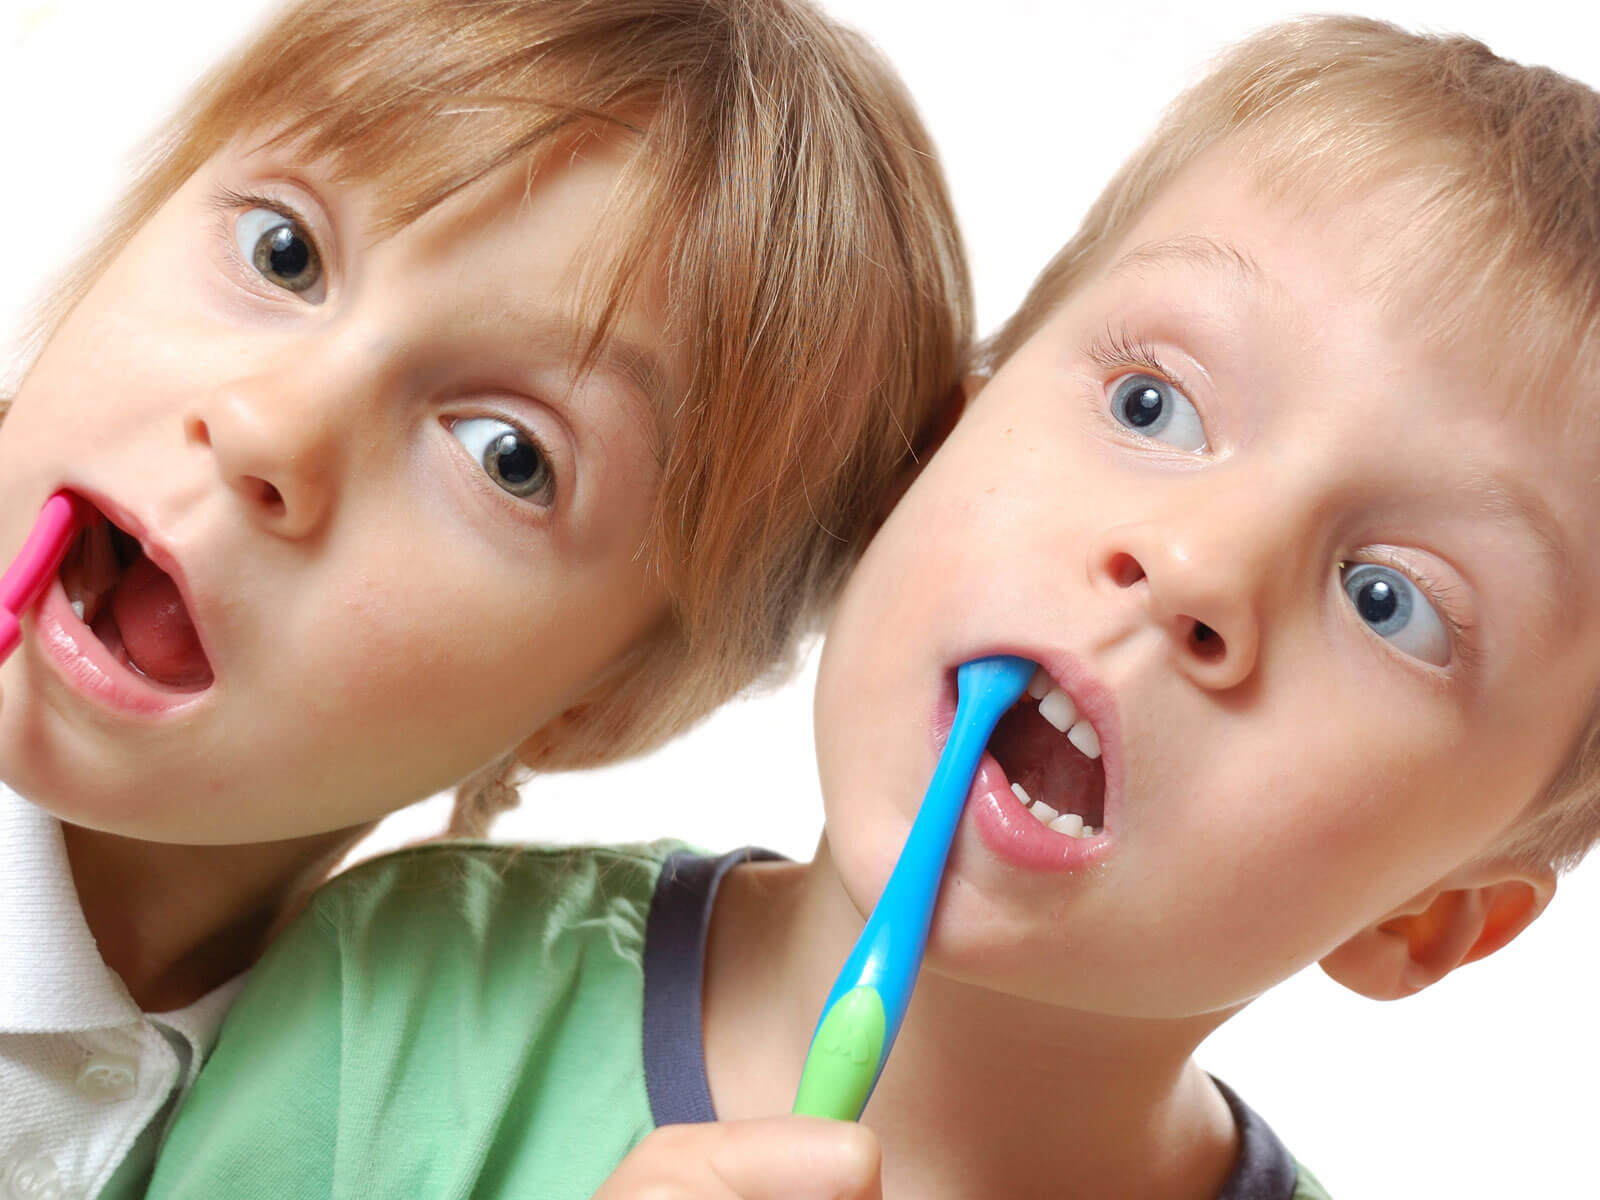 6 Tips To Make Oral Hygiene Fun For Your Child